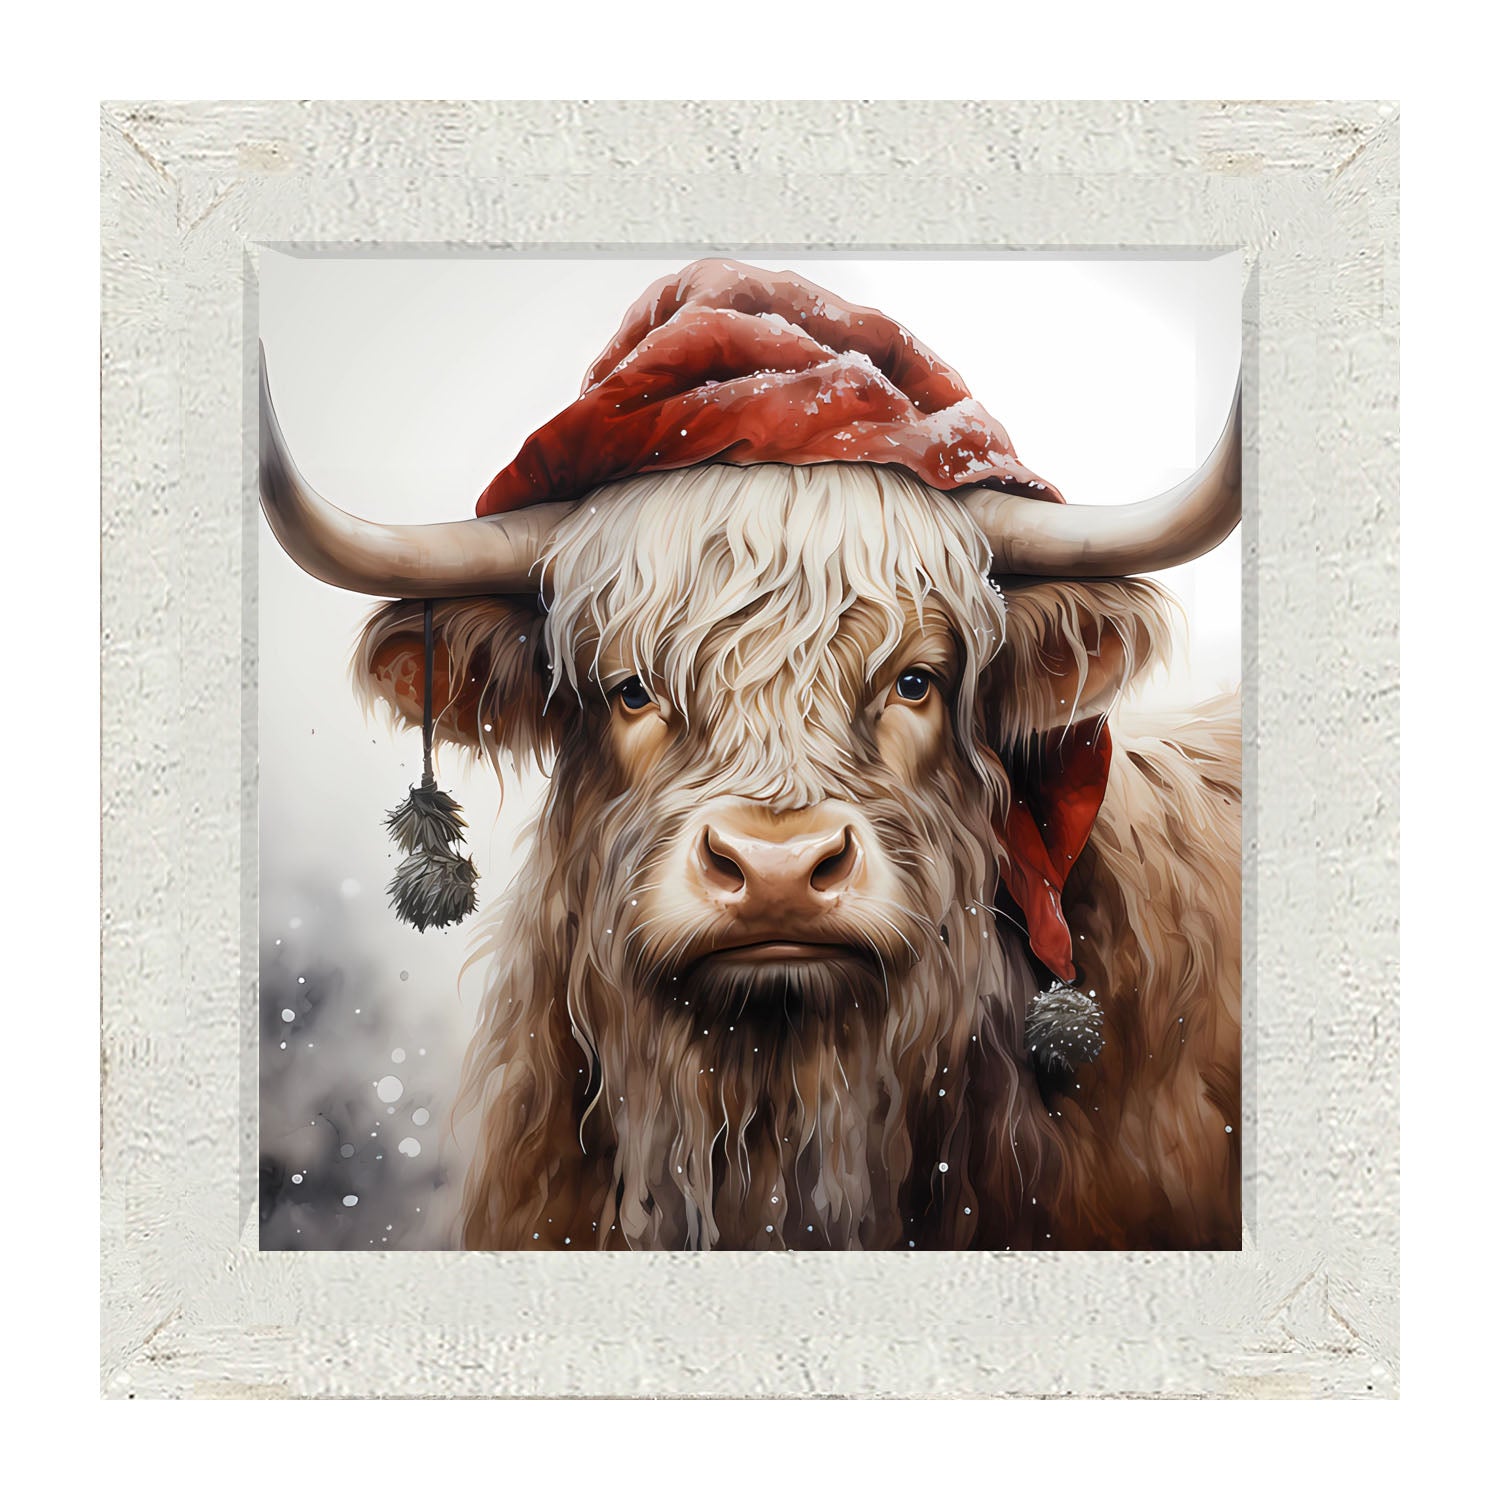 Highland cow with Santa hat